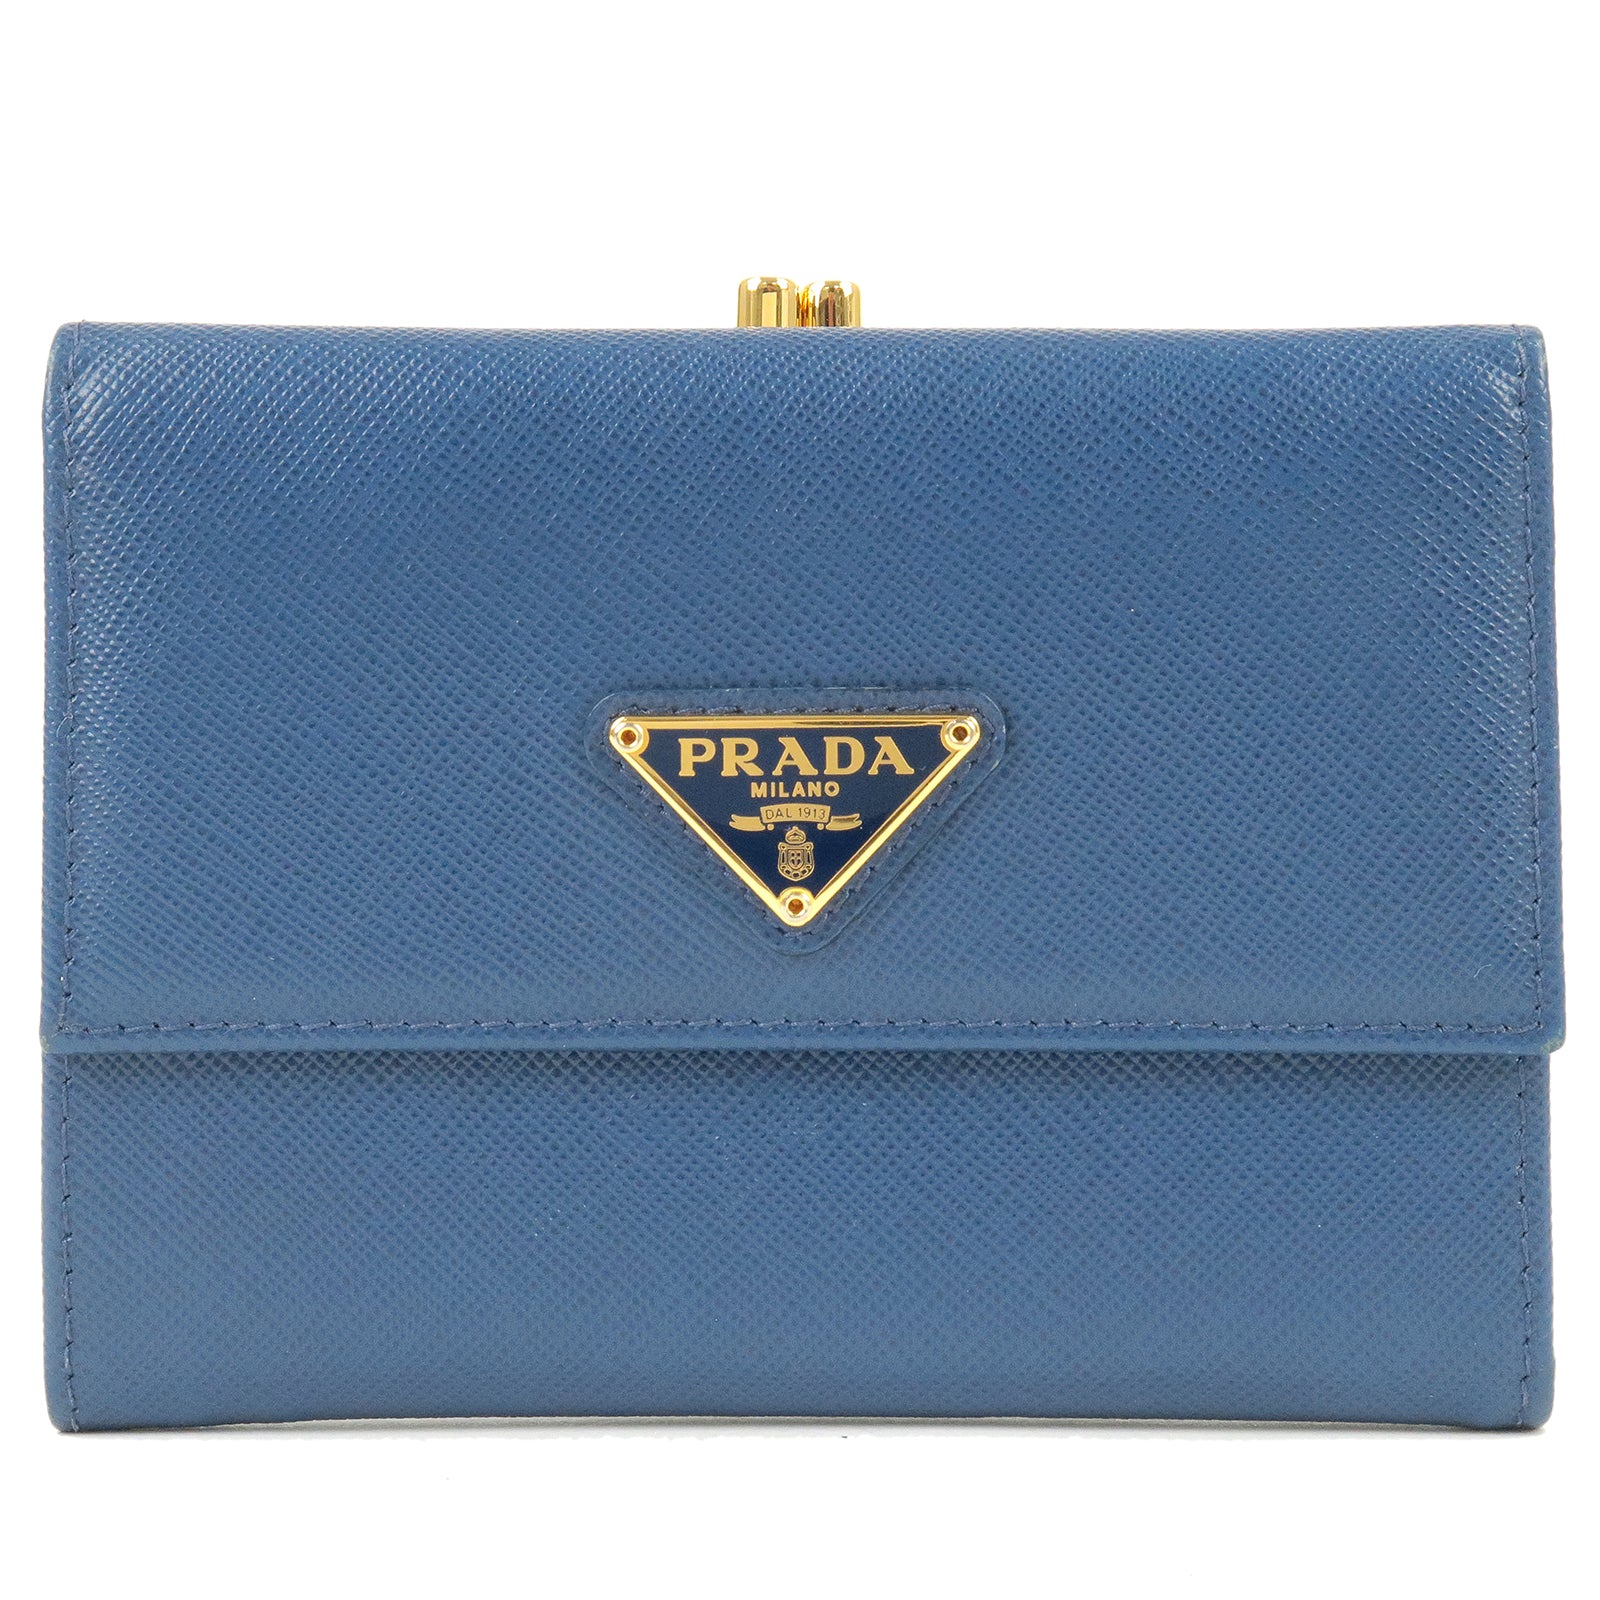 PRADA-Leather-Trifold-Wallet-Coin-Case-BLUETTE-Navy-1M1392